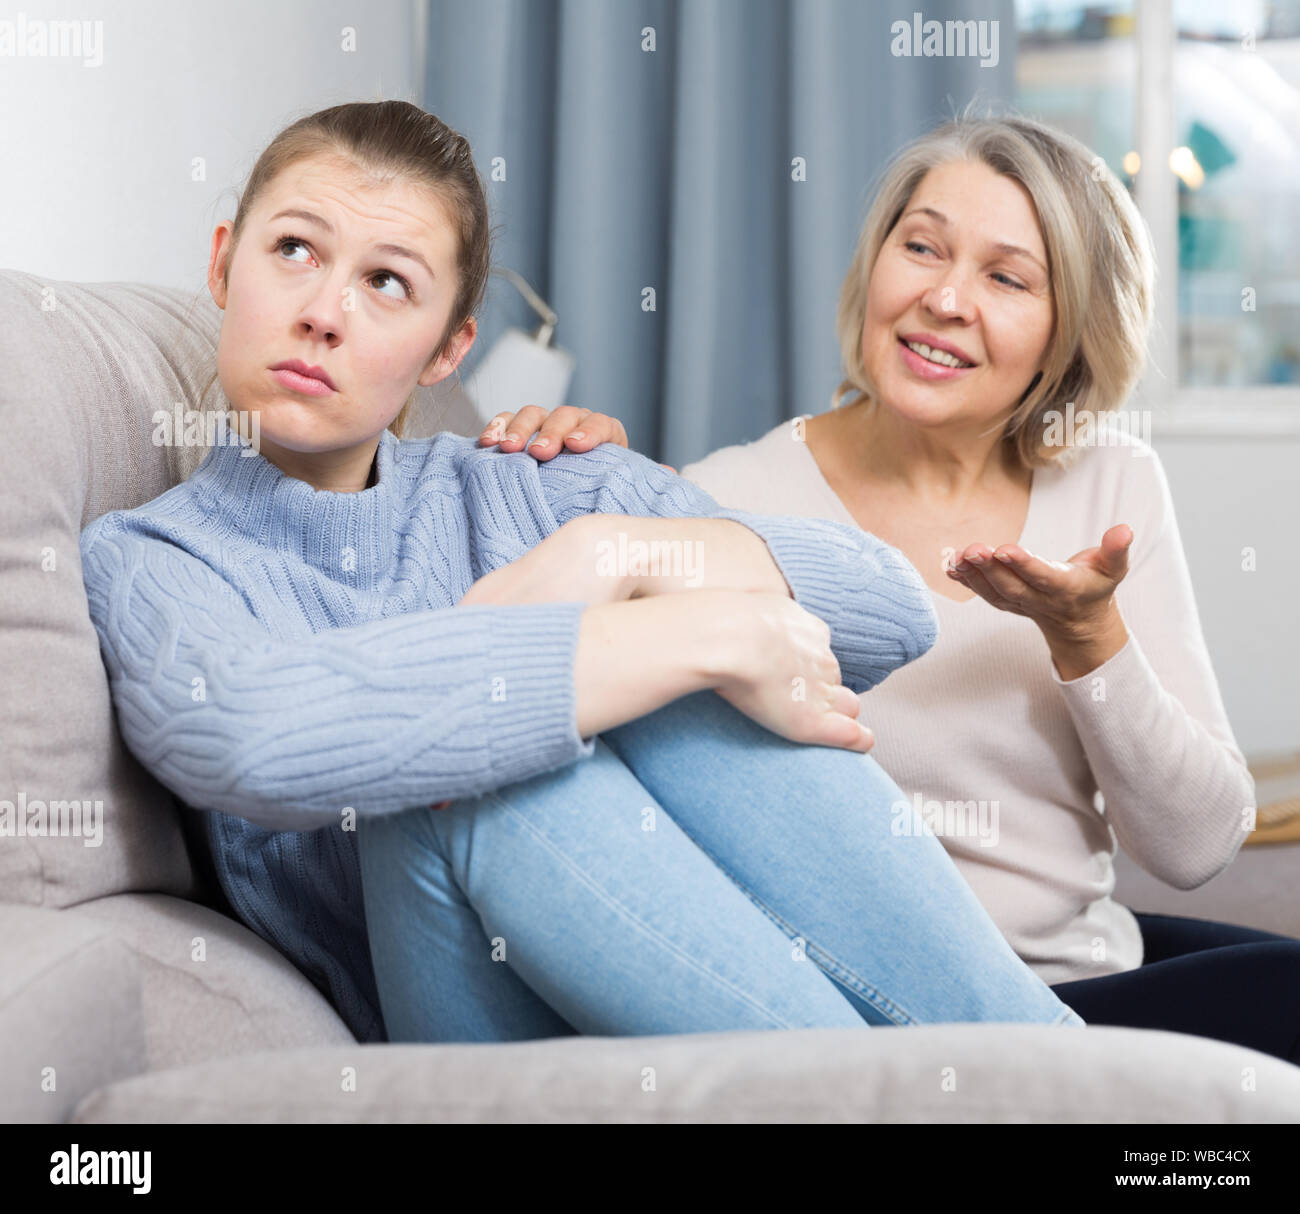 Mature mom apologizes to daughter after quarrel Stock Photo